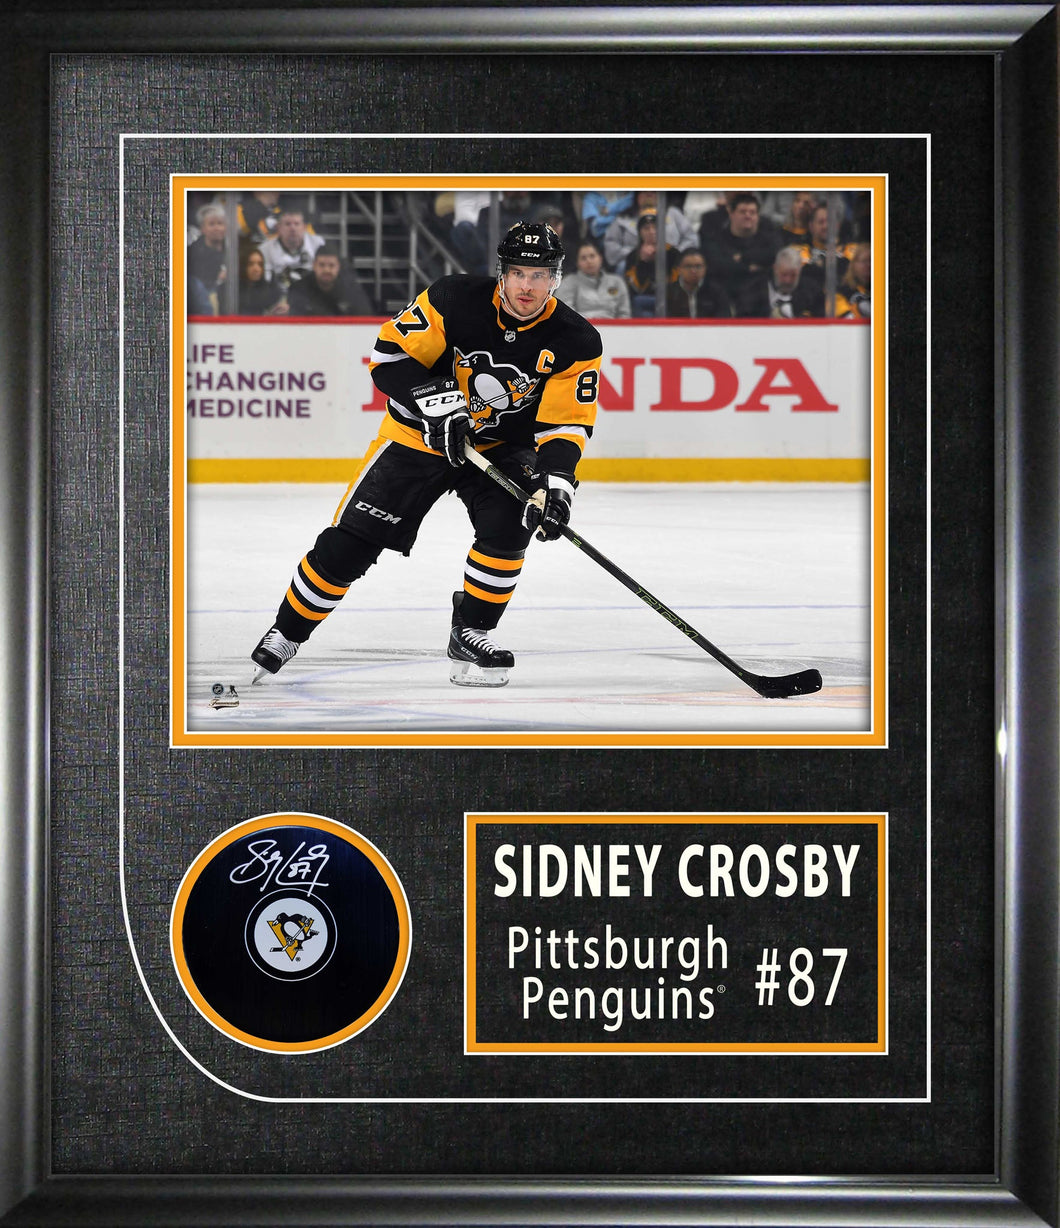 Sidney Crosby Signed Pittsburgh Penguins Puck Framed with 8x10 Photo